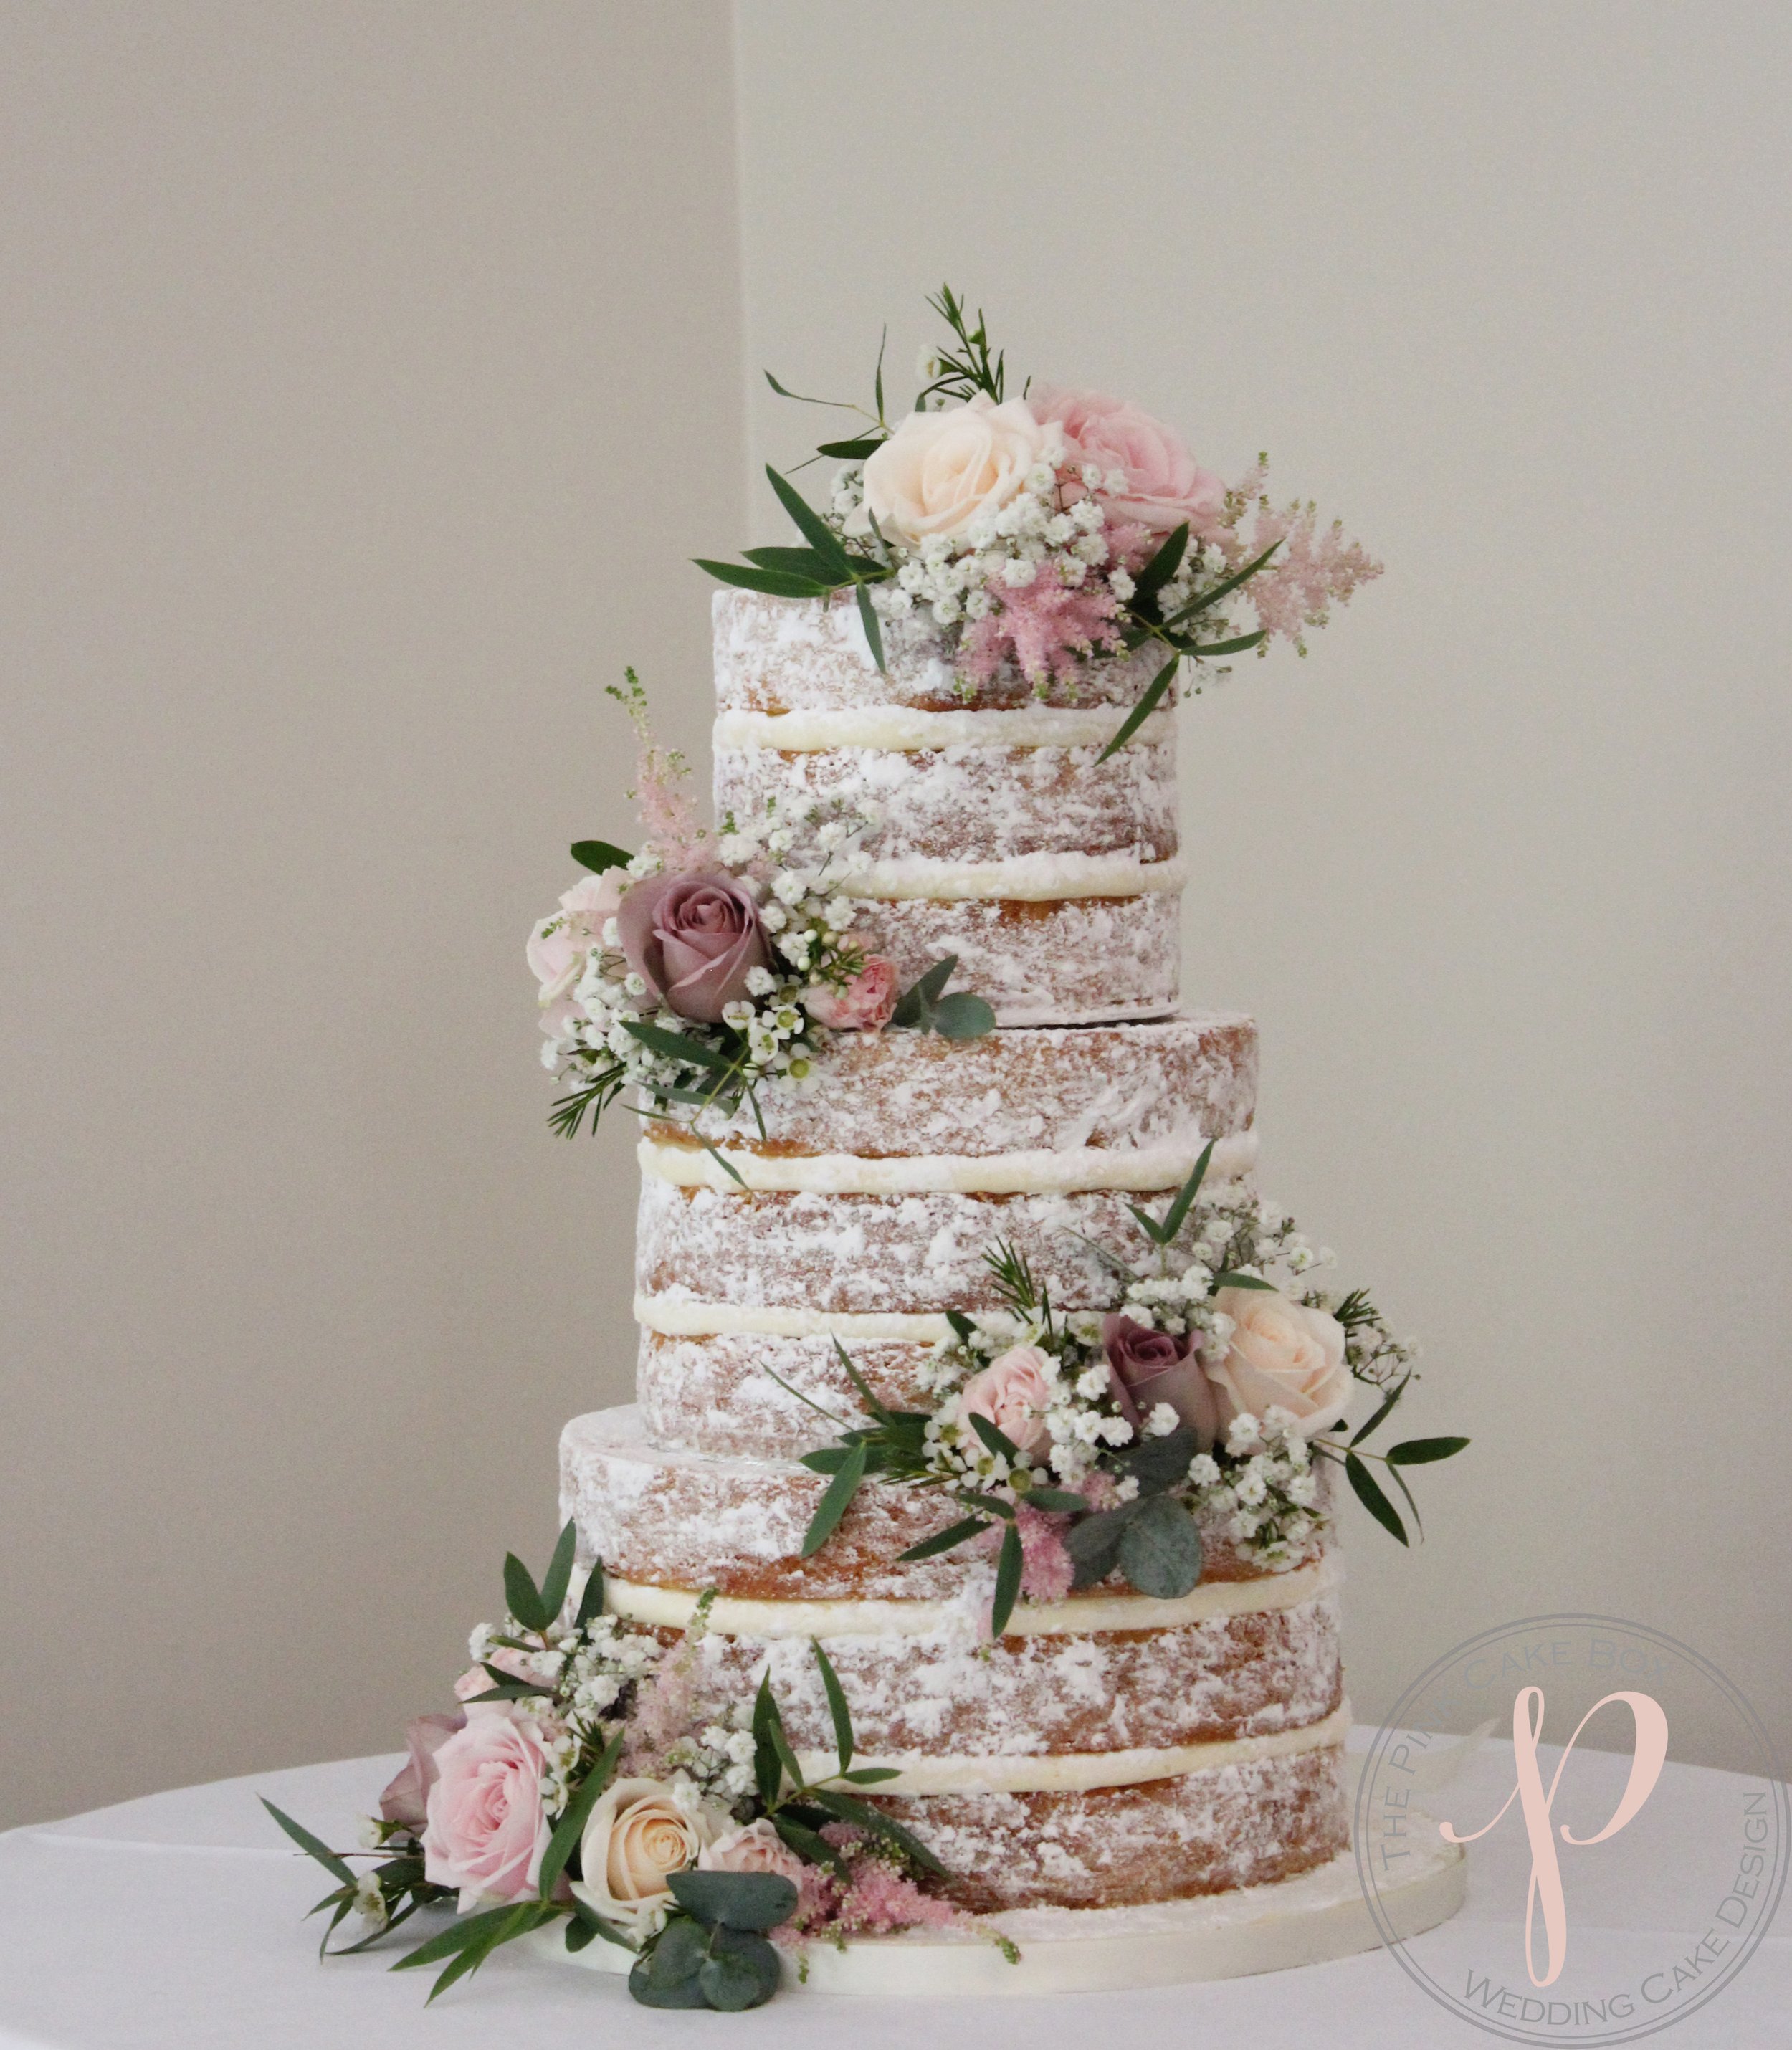 3 things to consider about a Naked Wedding Cake | Iced and Spliced